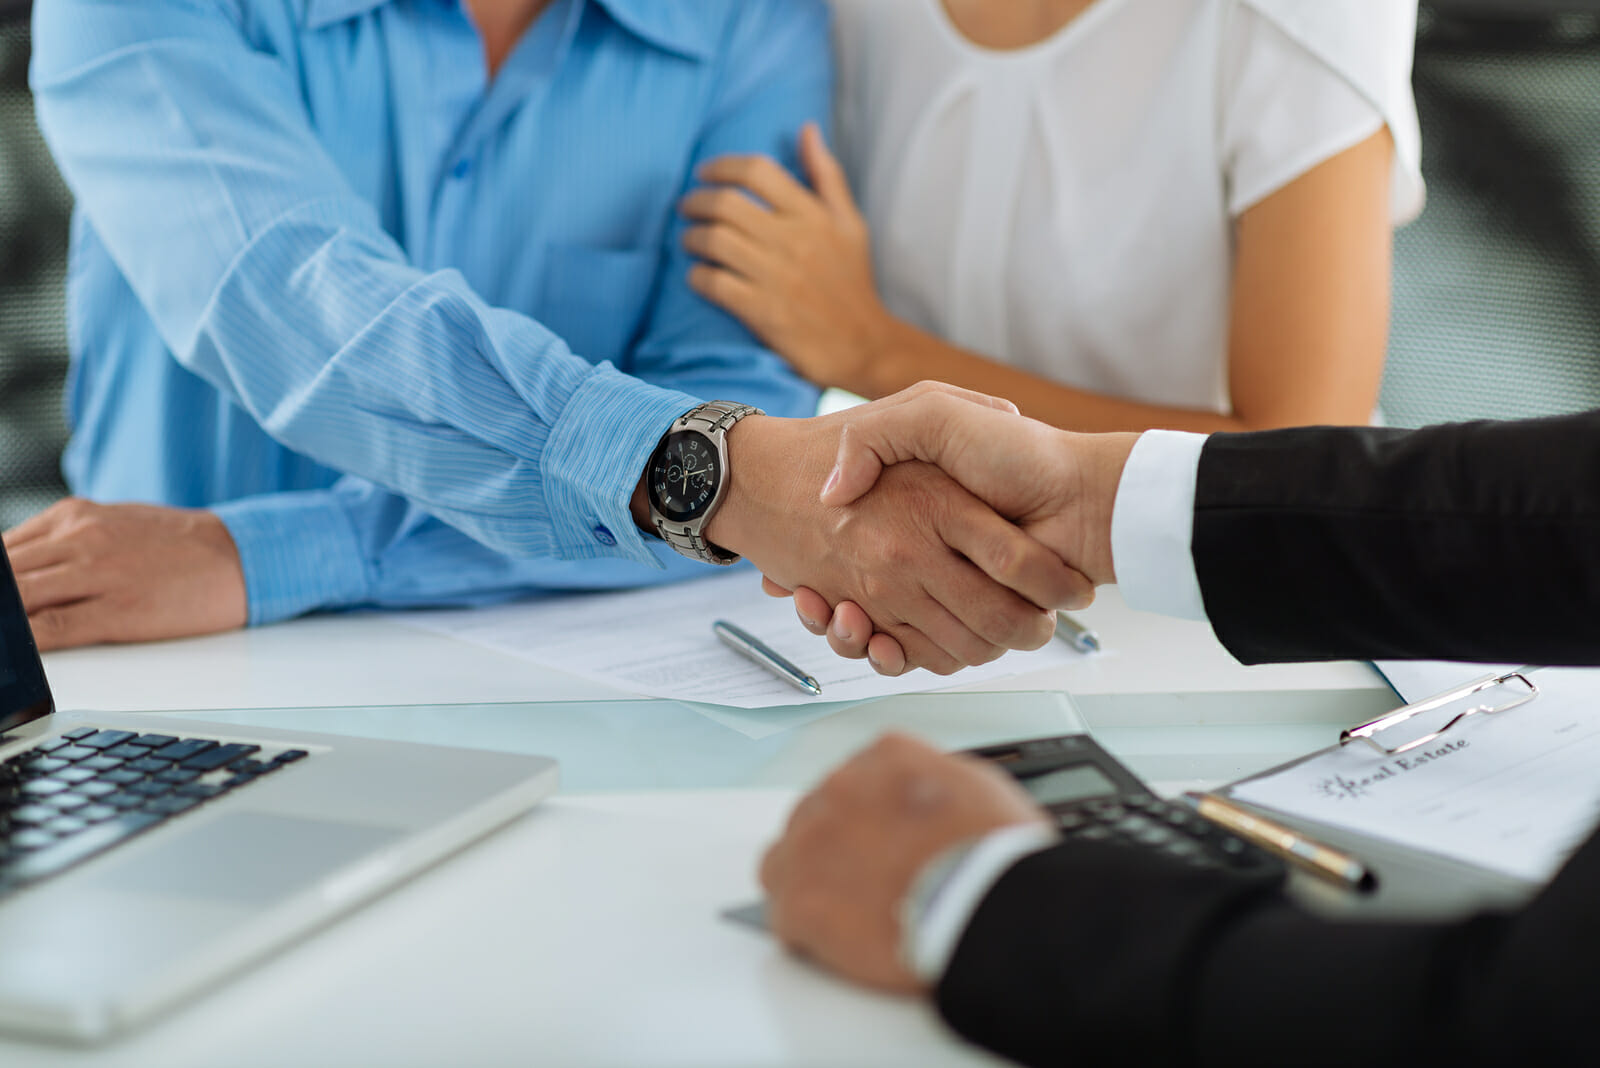 Should I Hire an Attorney to Assist with my Residential Real Estate Closing